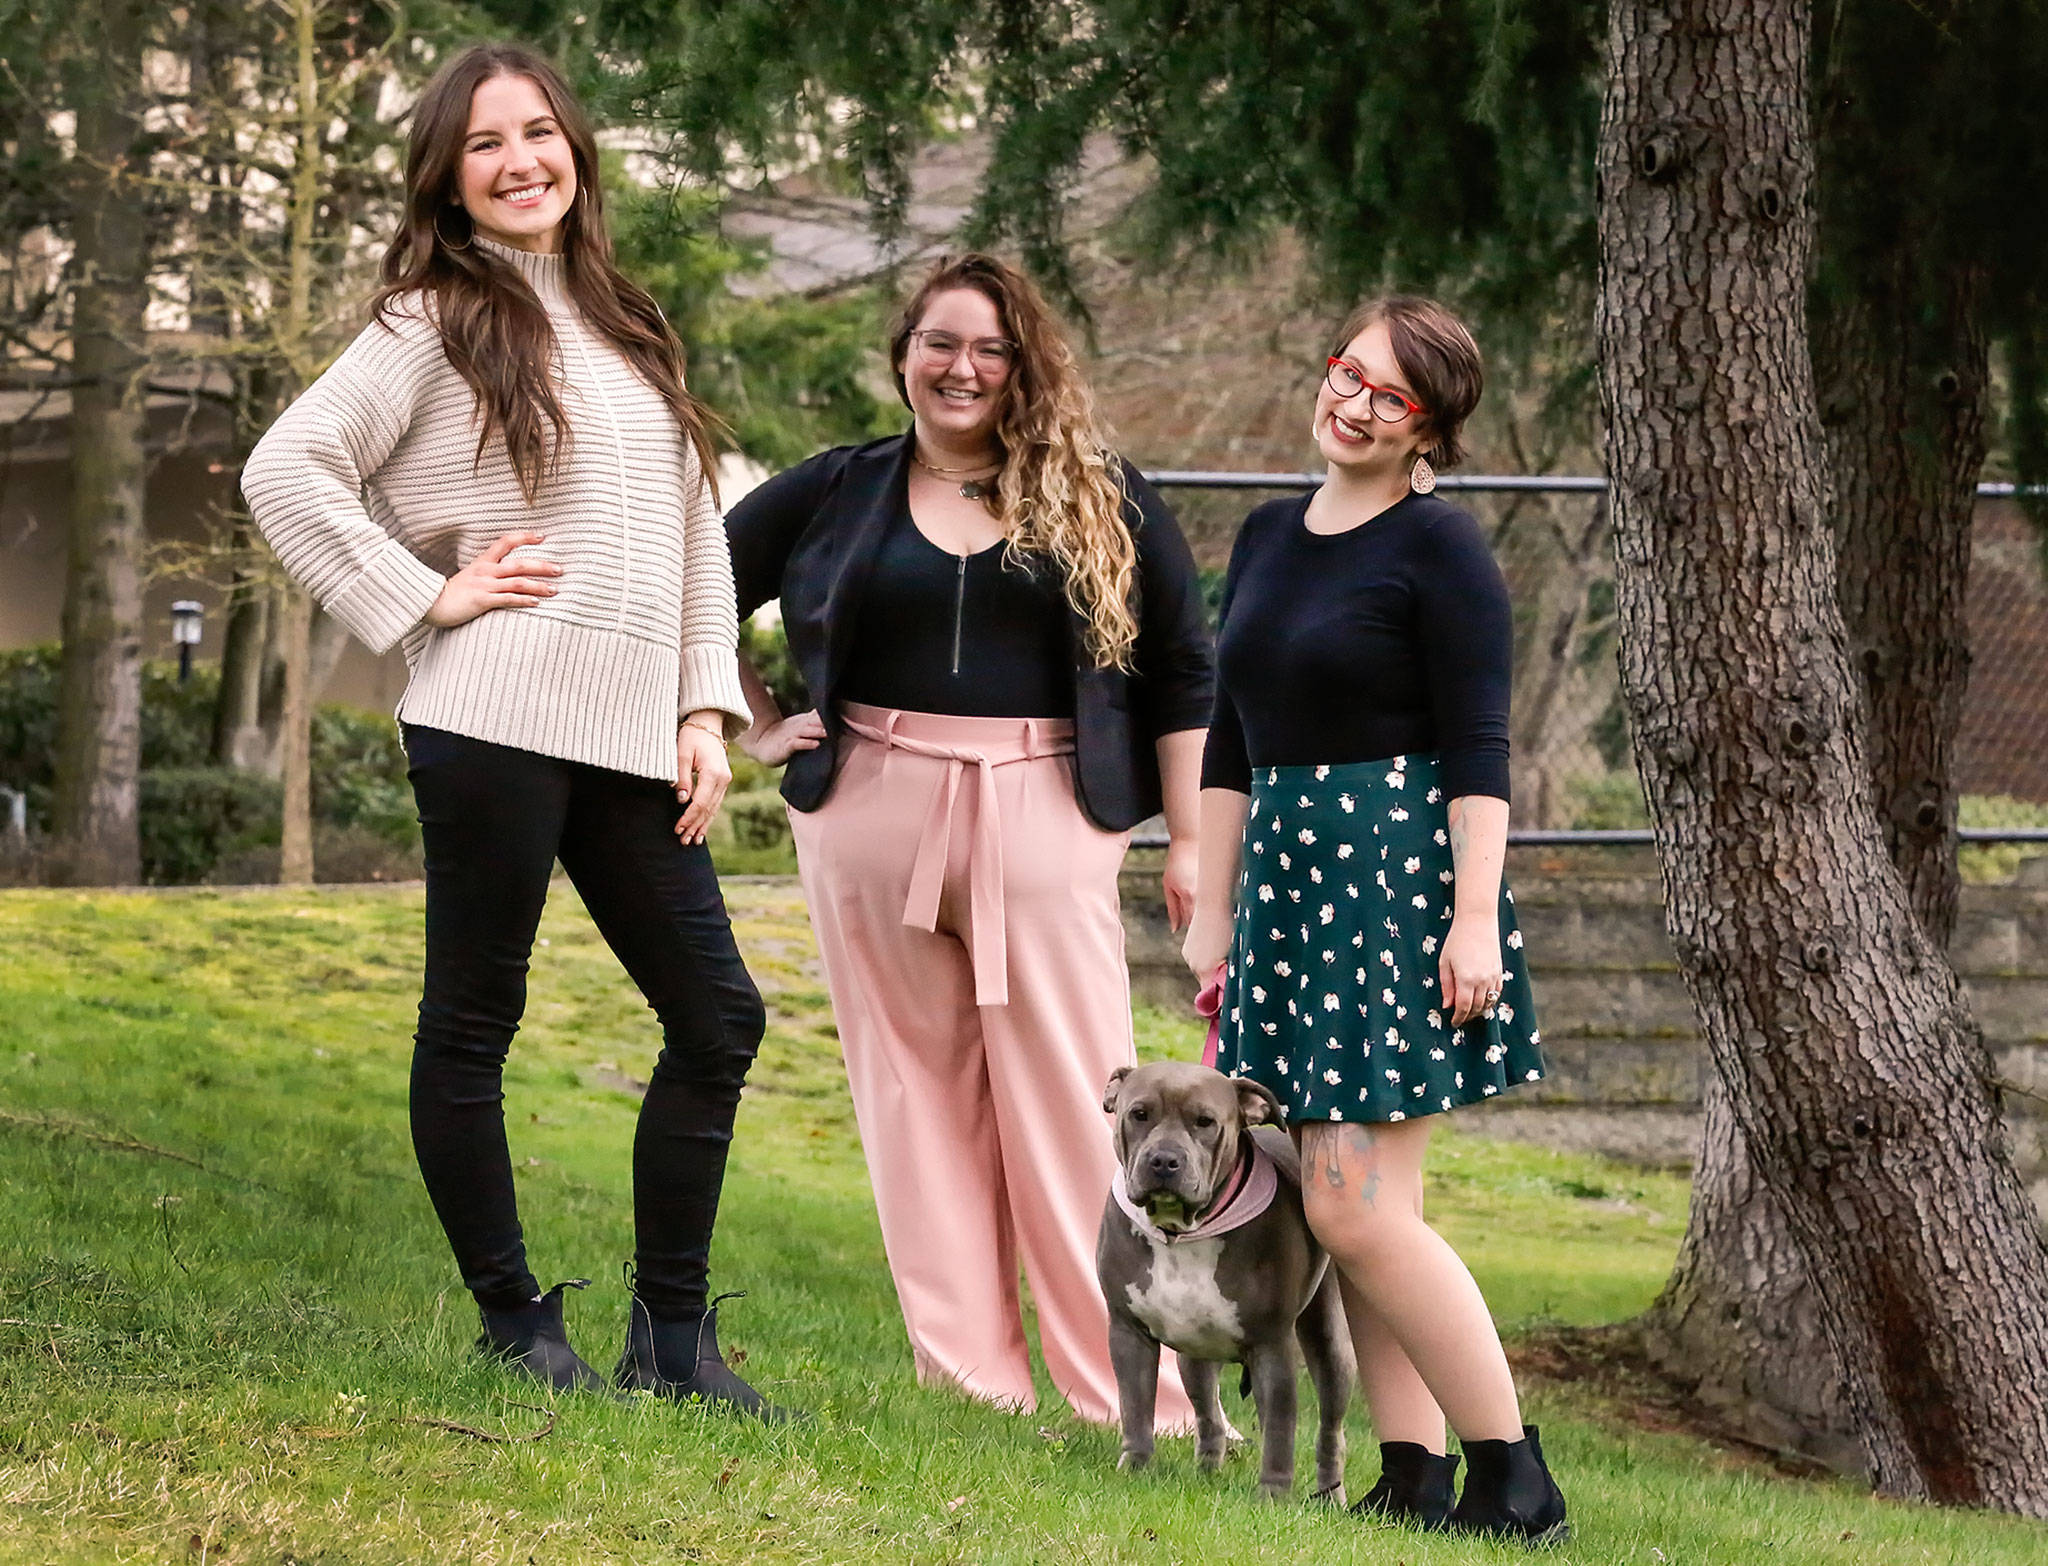 Erin Staadecker (left), Jael Weinburg (center) and Kaylee Allen, with Rosie the dog, formed the Edmonds firm Creative Dementia Collective. The company helps memory care patients and caregivers by providing art, music and other creative therapies. (Kevin Clark / The Herald)